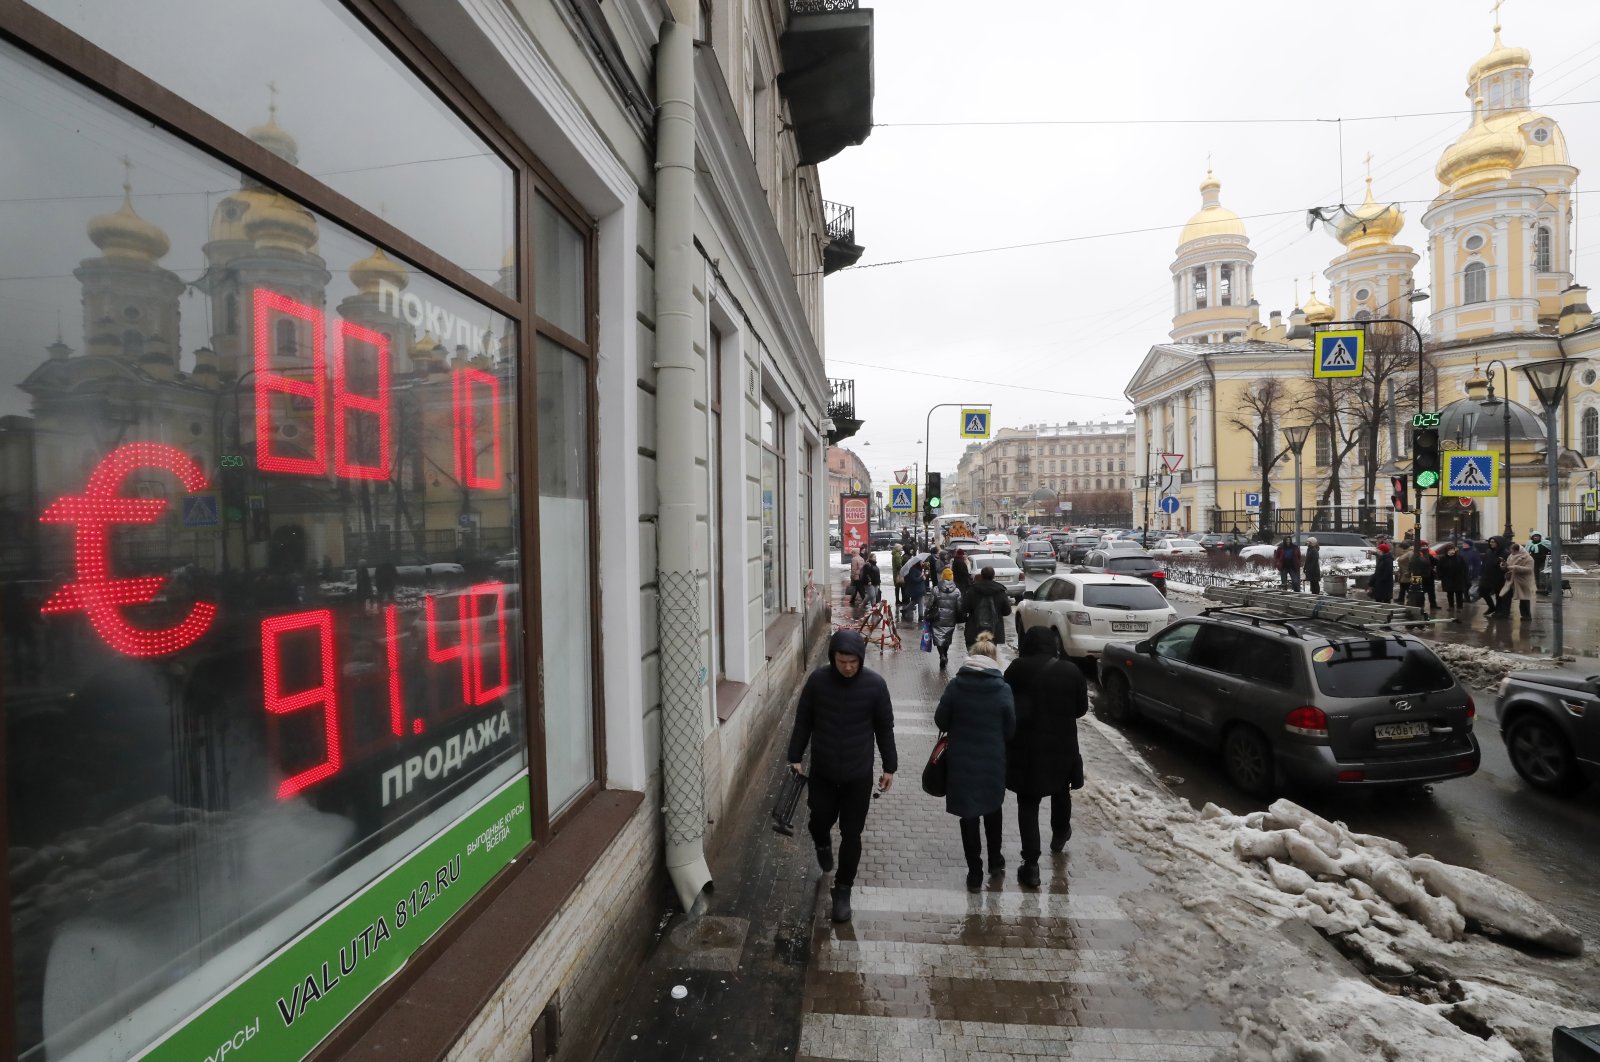 People walk in front of an electronic panel displaying the euro currency rate at an exchange office in St. Petersburg, Russia, Feb. 22, 2022. (EPA Photo)